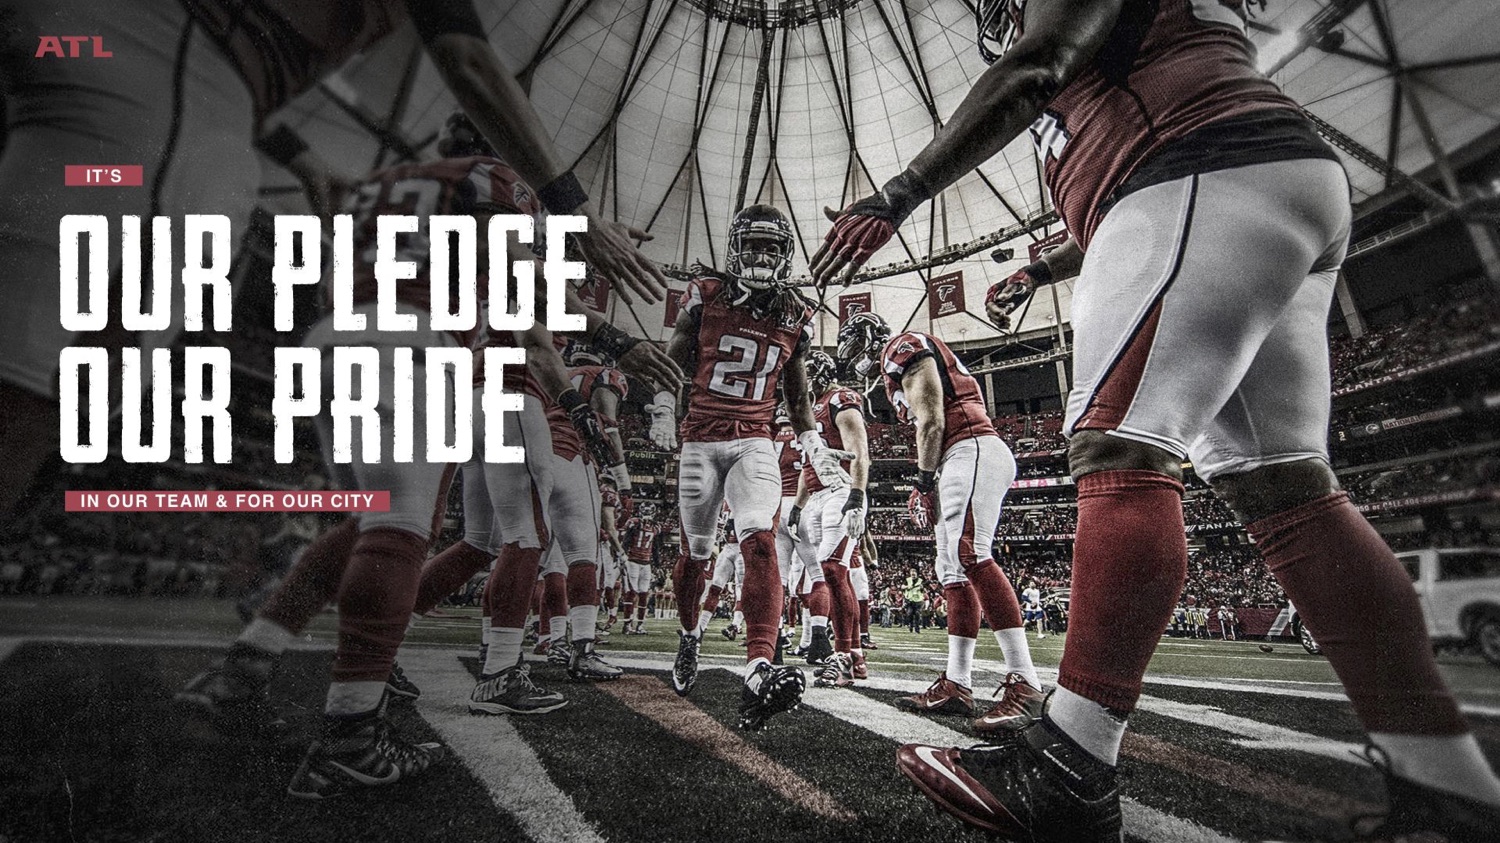 It's our pledge and our pride.